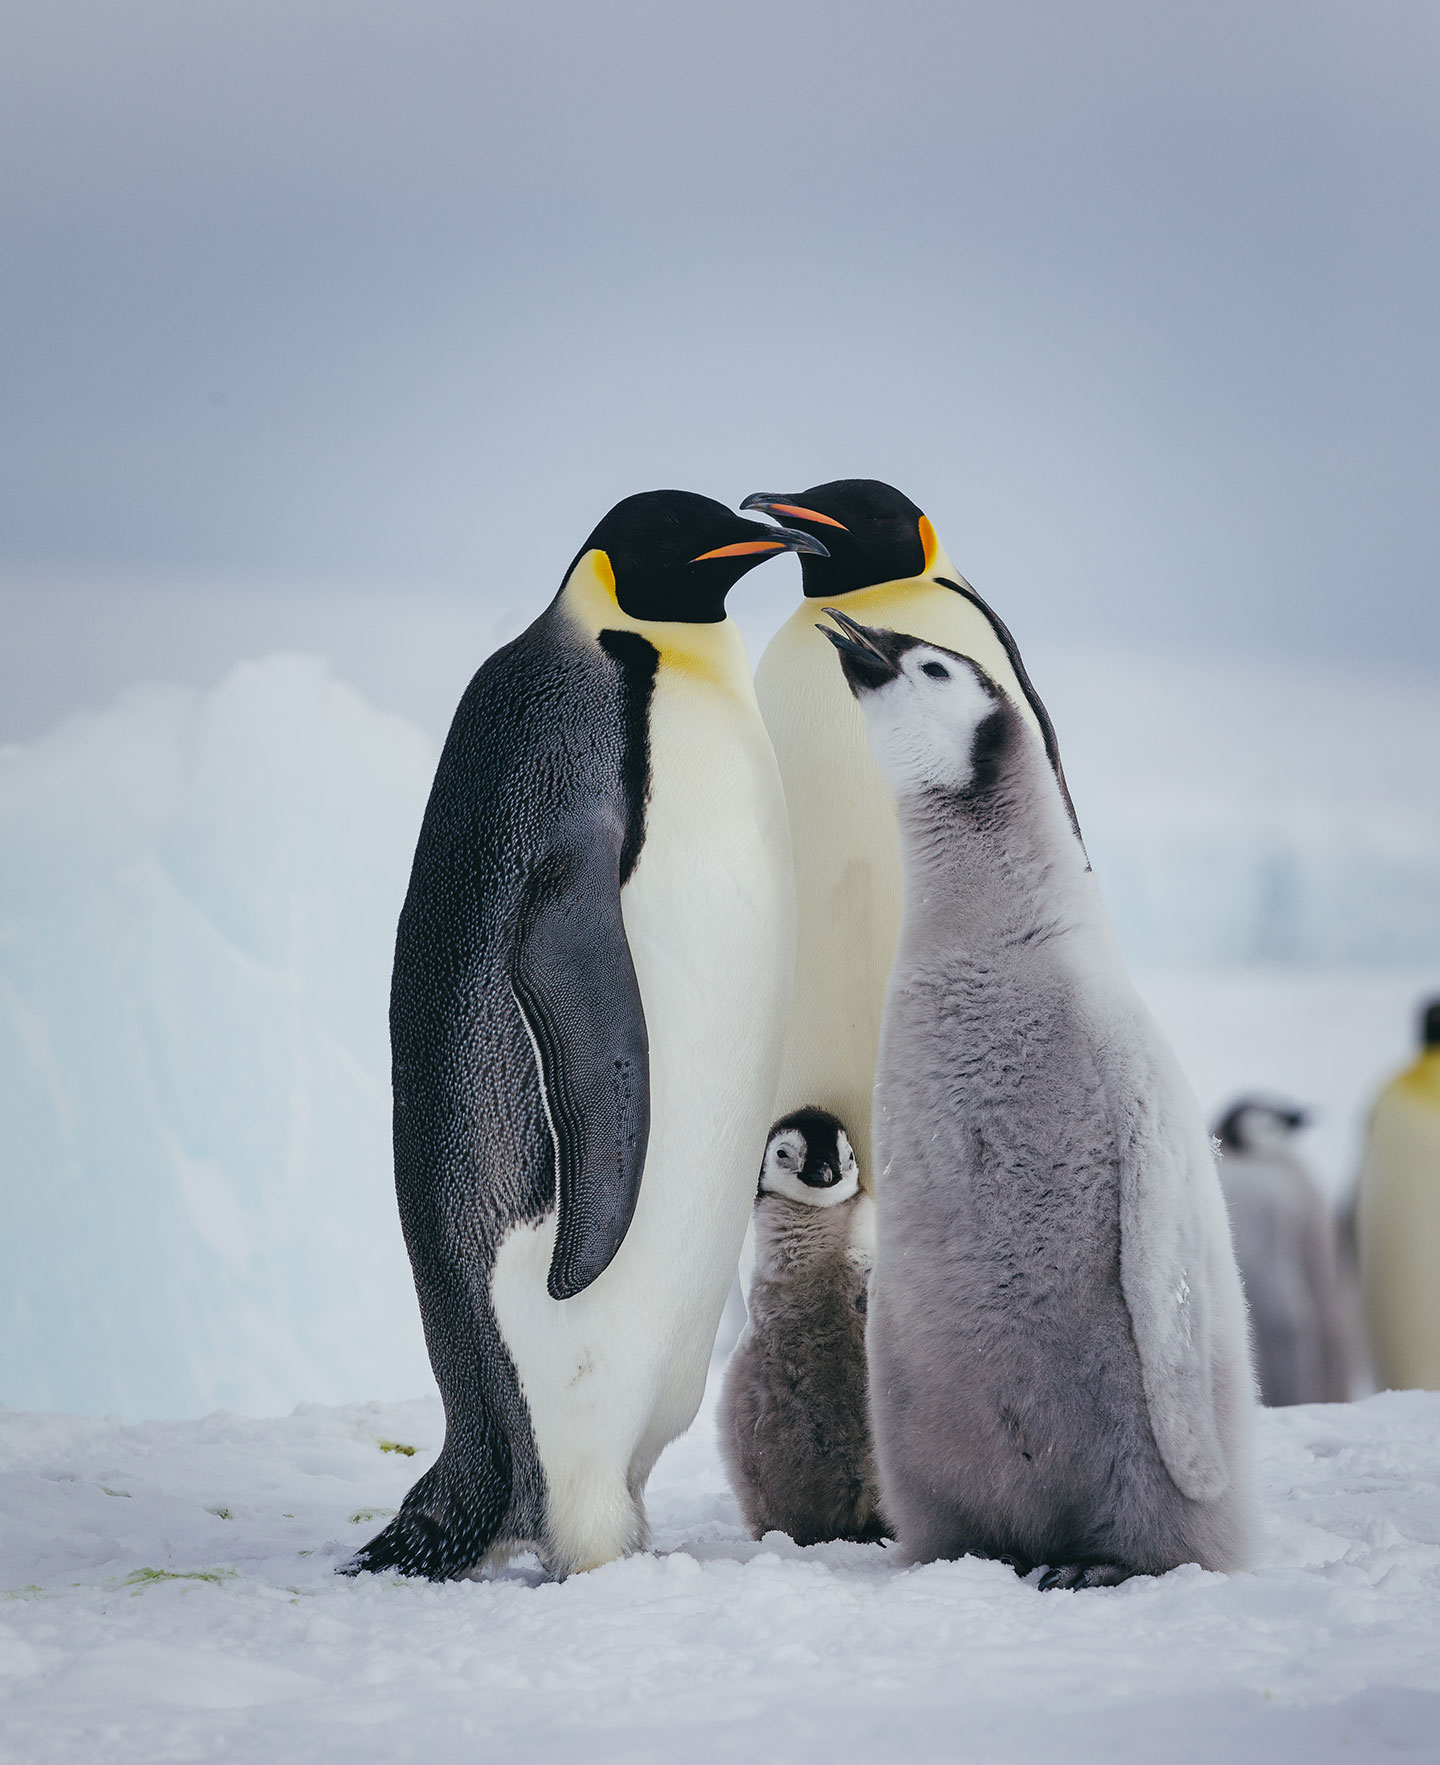 How to see Penguins in Antarctica